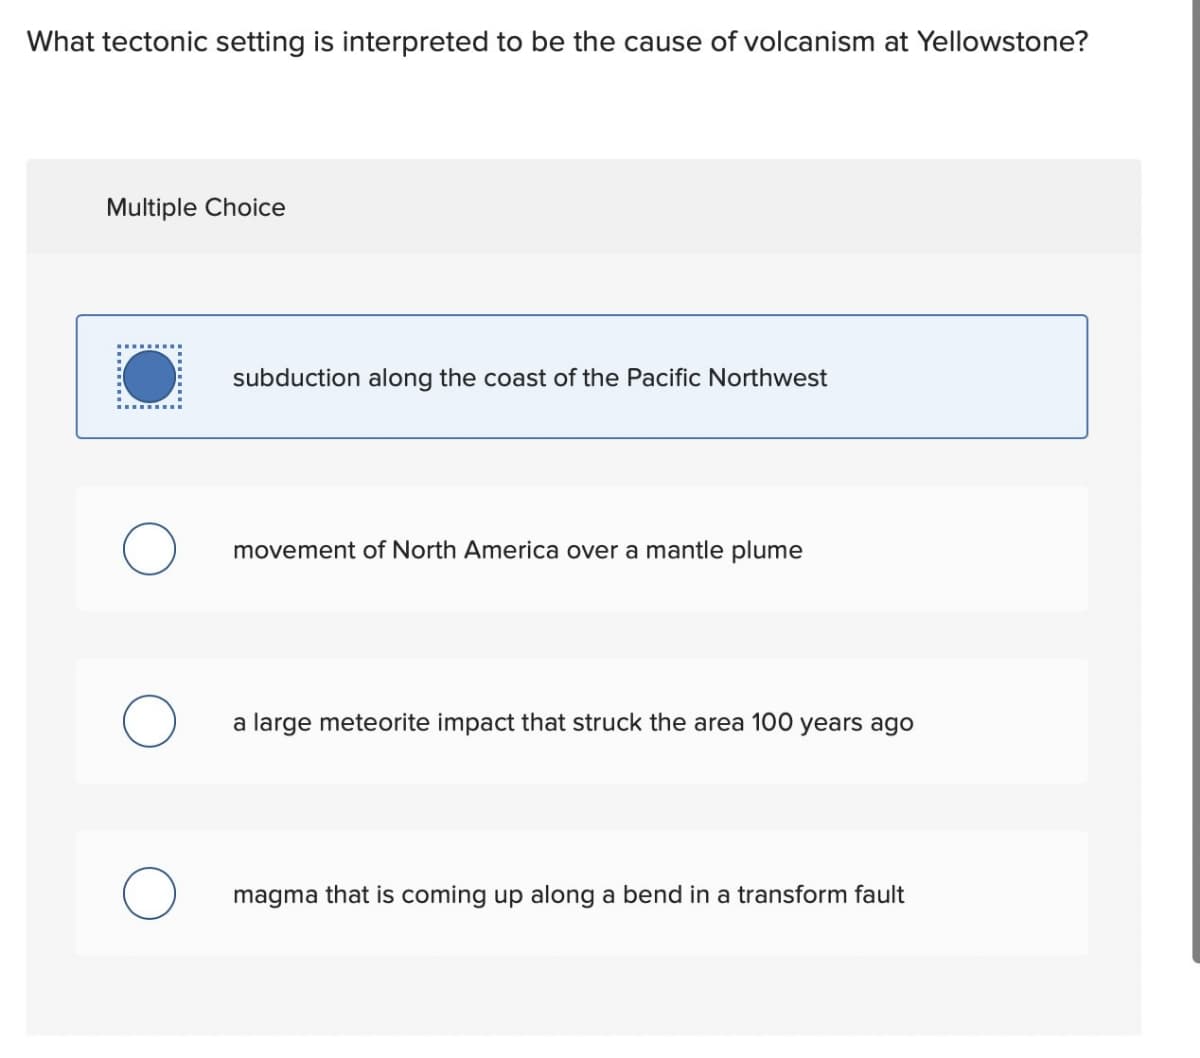 What tectonic setting is interpreted to be the cause of volcanism at Yellowstone?
Multiple Choice
subduction along the coast of the Pacific Northwest
movement of North America over a mantle plume
a large meteorite impact that struck the area 100 years ago
magma that is coming up along a bend in a transform fault